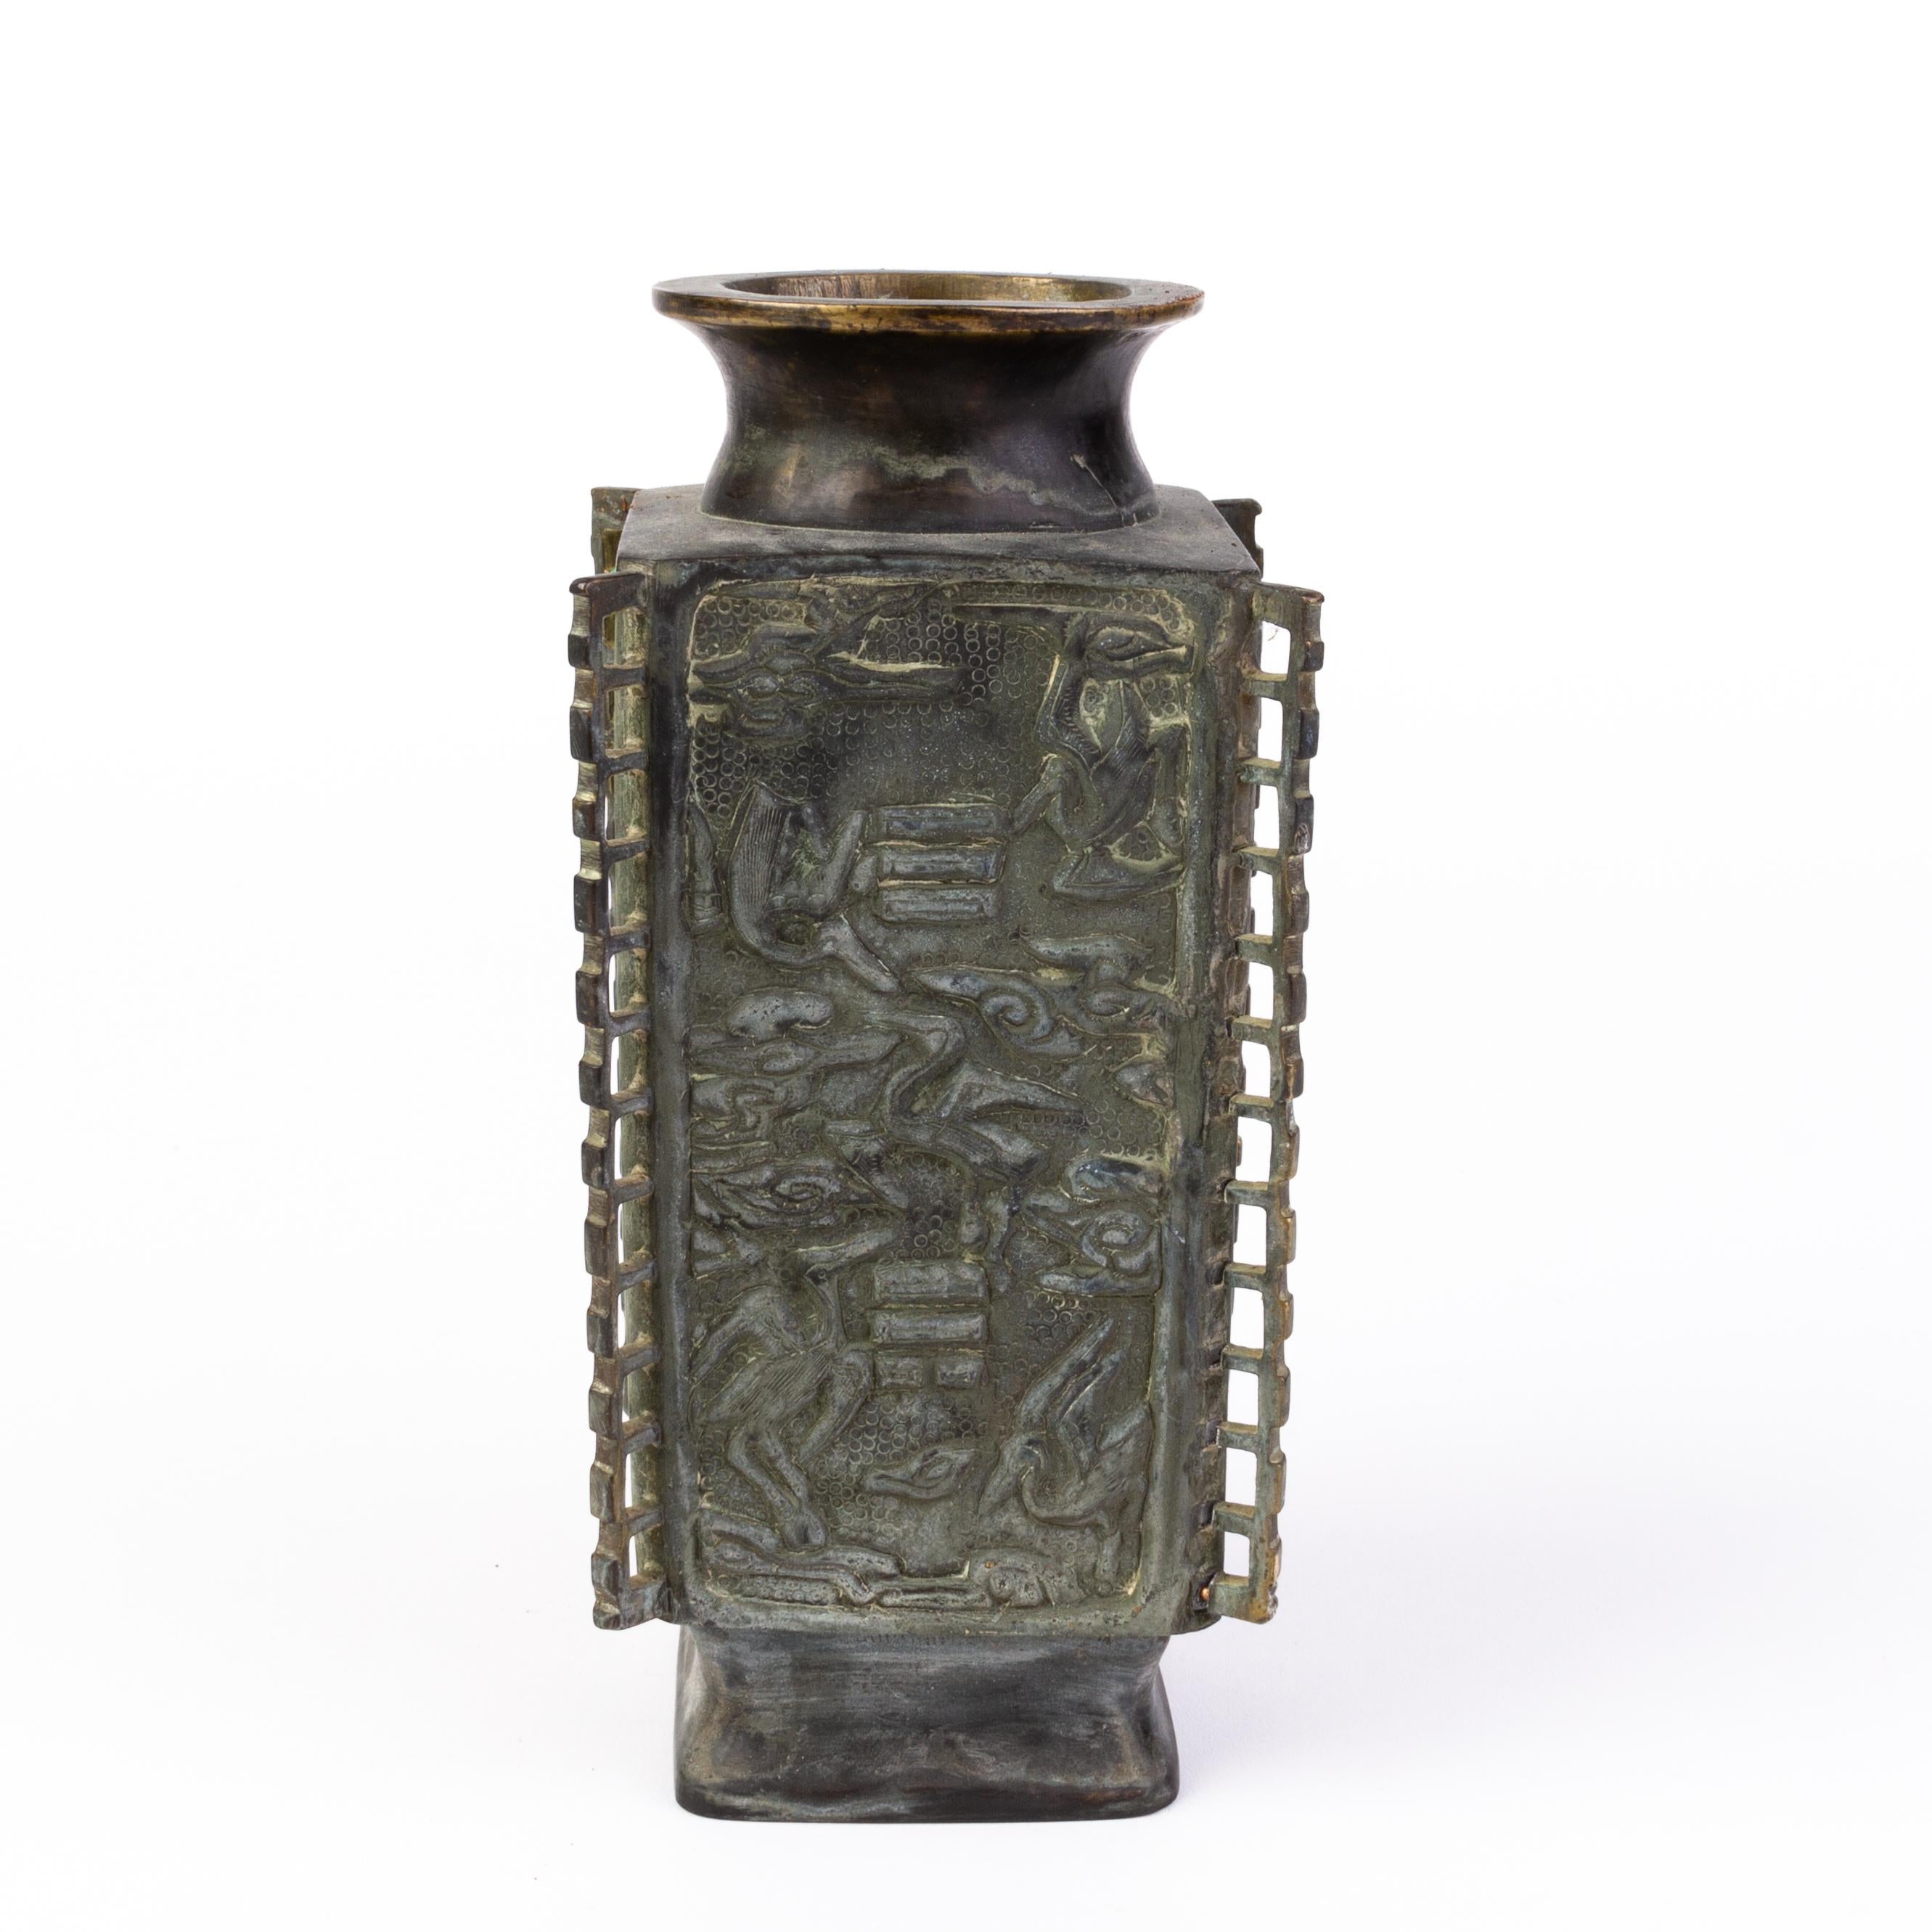 Early 20th century Archaist Chinese bronze vase.
From a private collection.
Free international shipping.